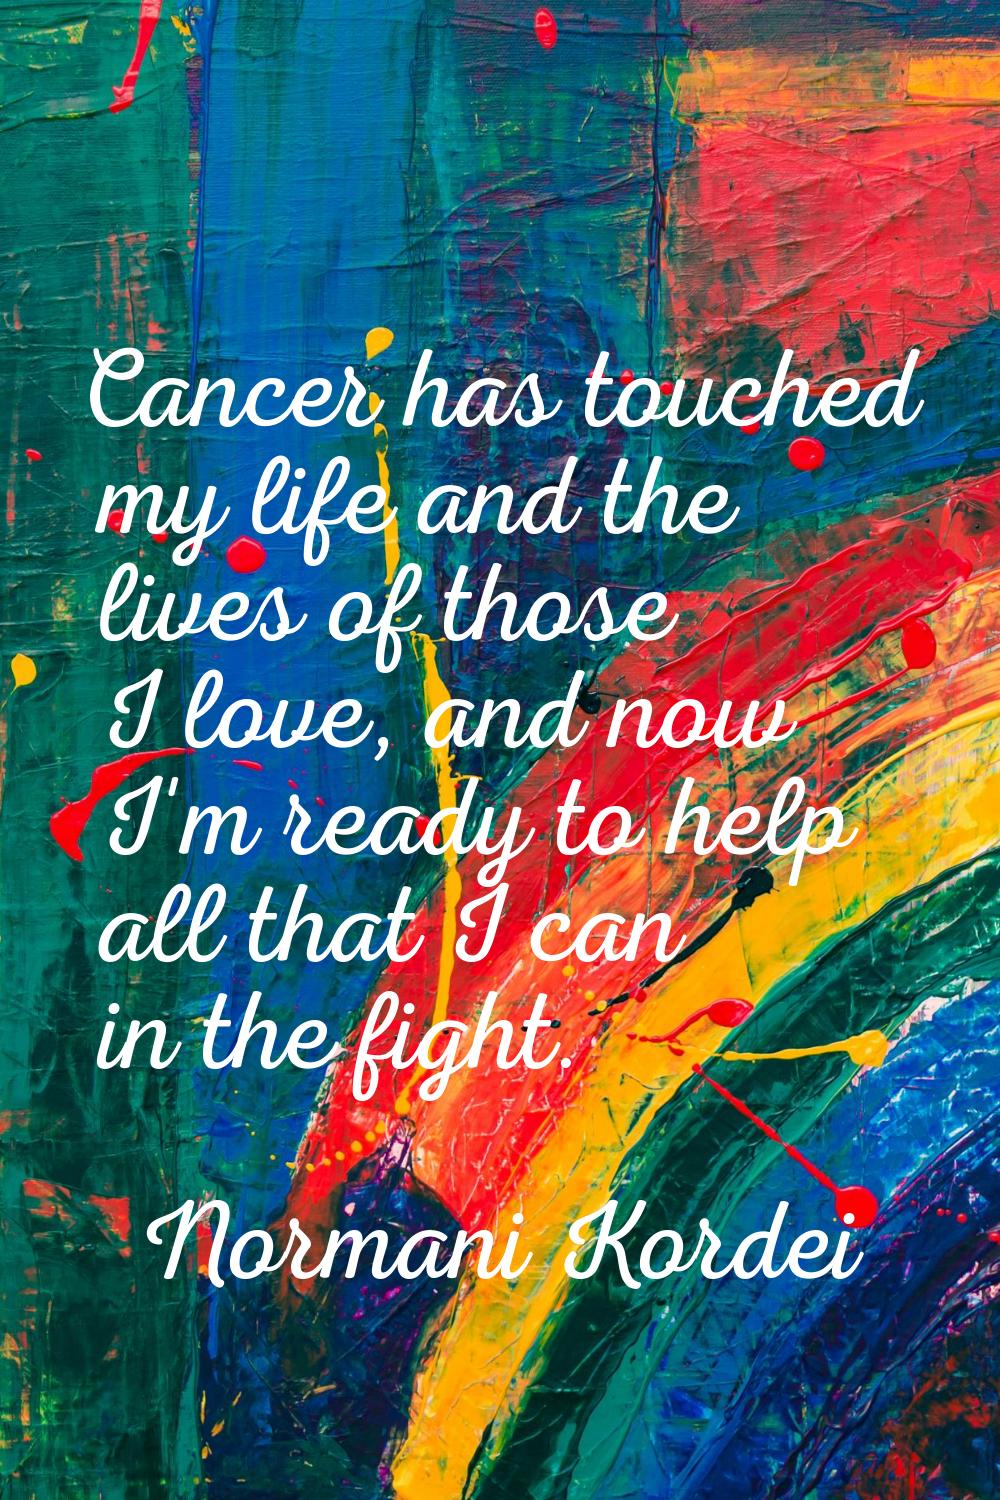 Cancer has touched my life and the lives of those I love, and now I'm ready to help all that I can 